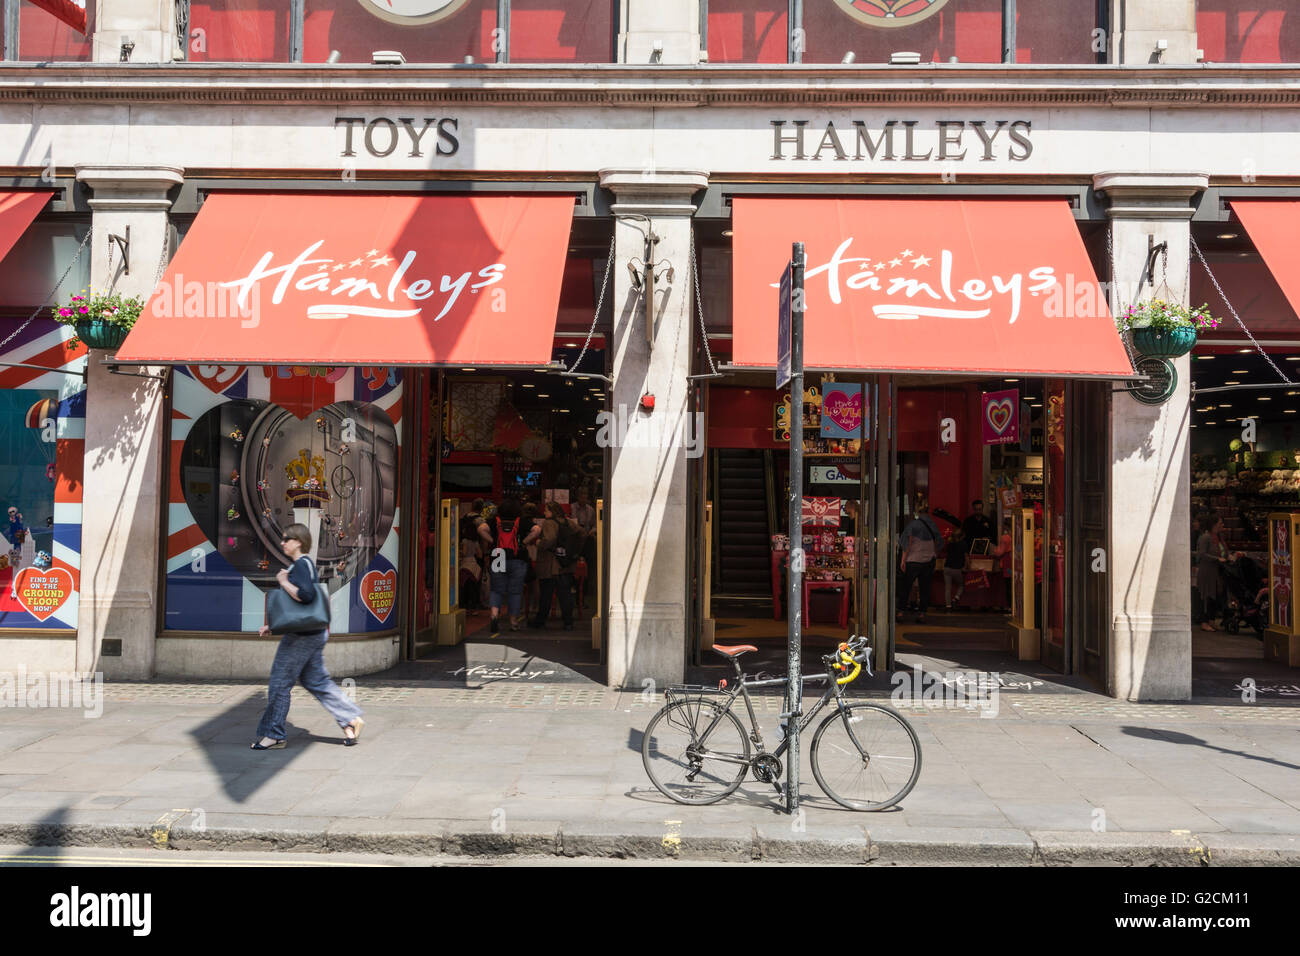 People walking in Front of the famous Hamleys toy store in central London, UK Stock Photo